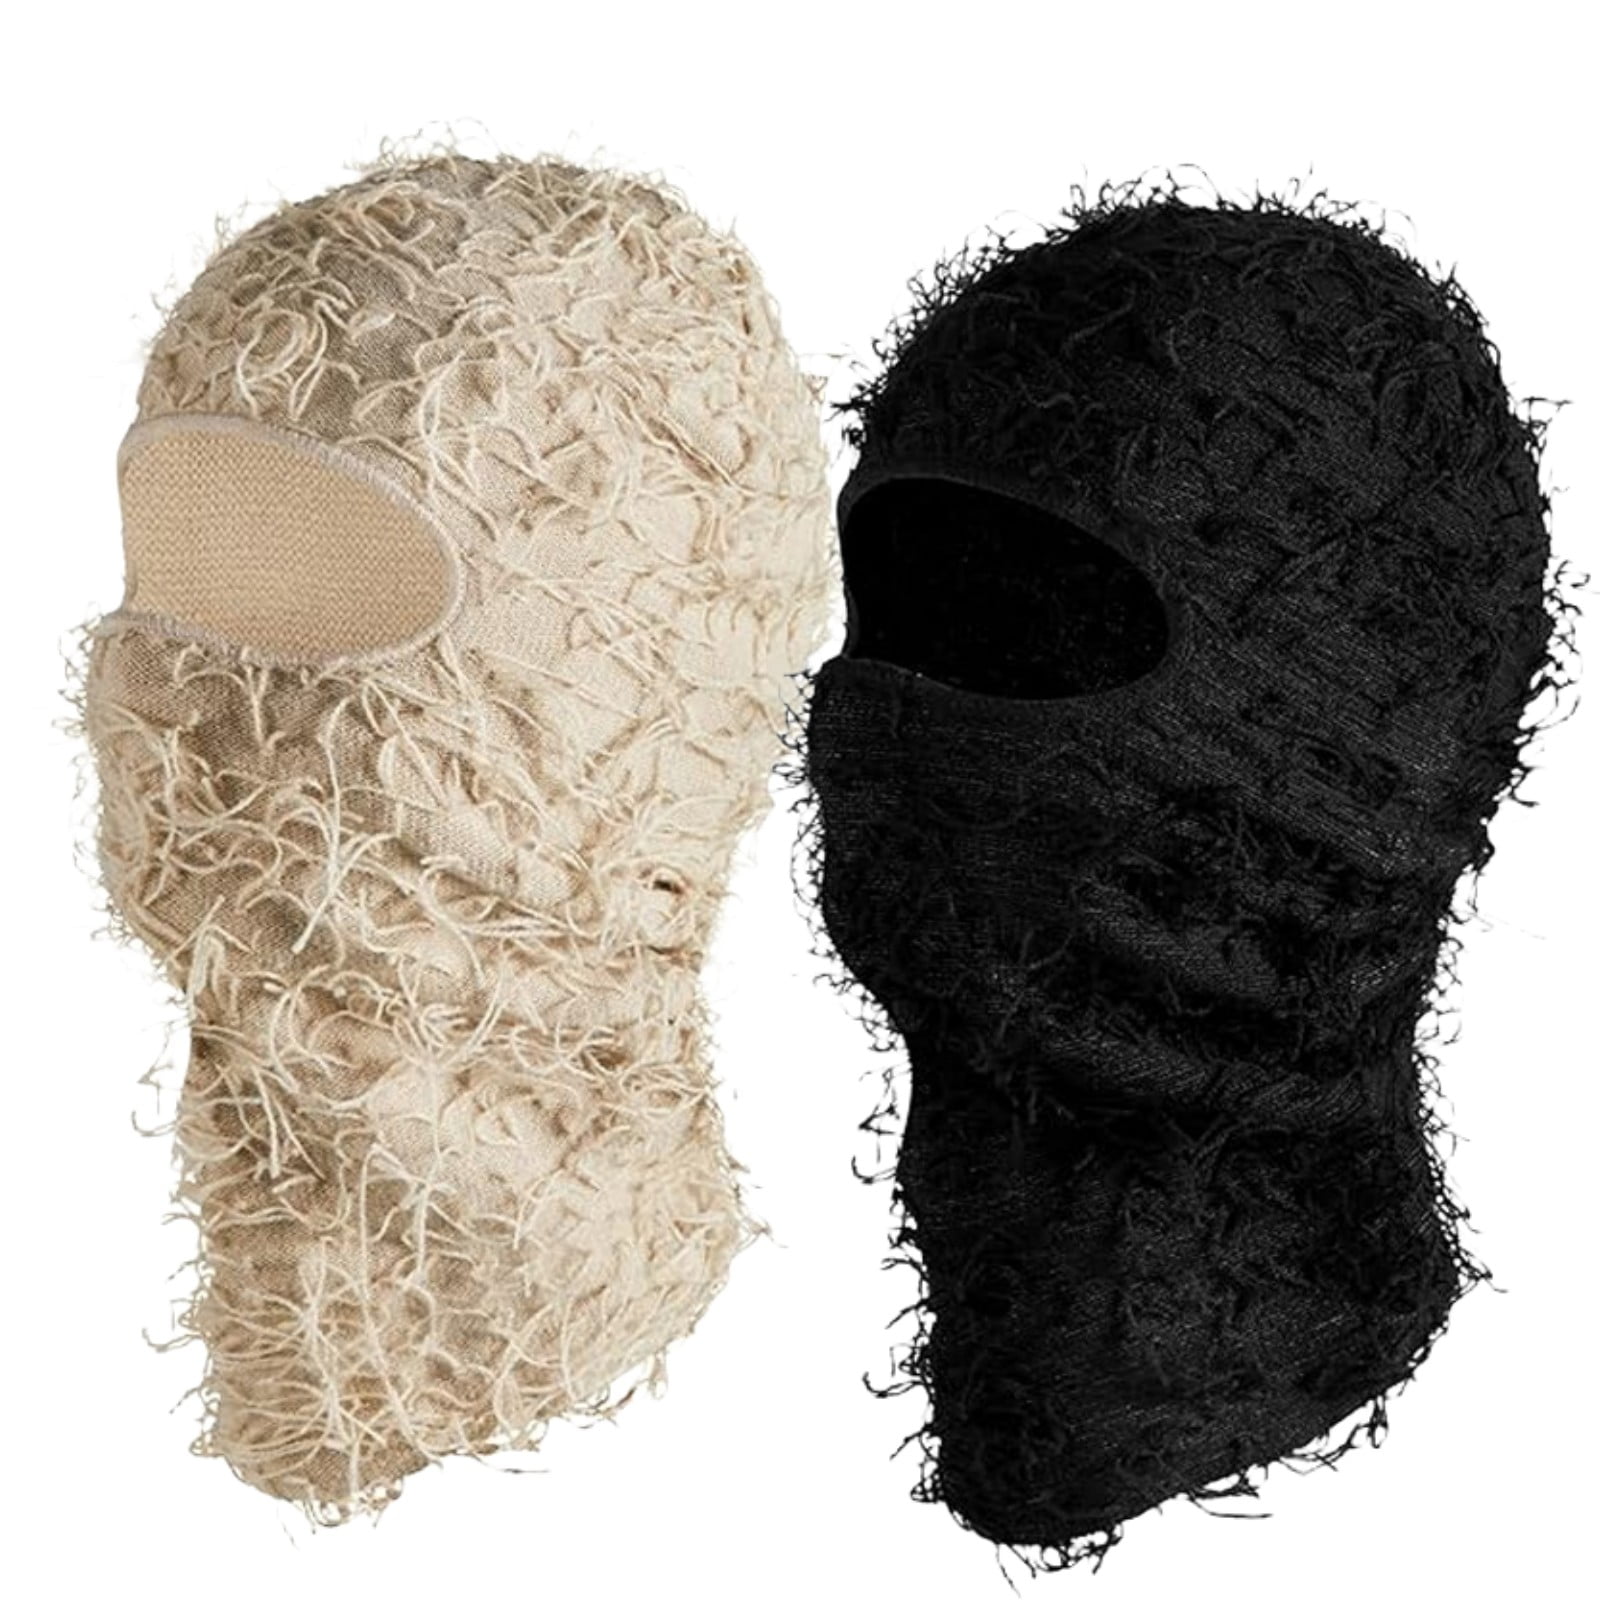 Balaclava Distressed Knitted Full Face Ski Mask Winter Windproof Neck ...